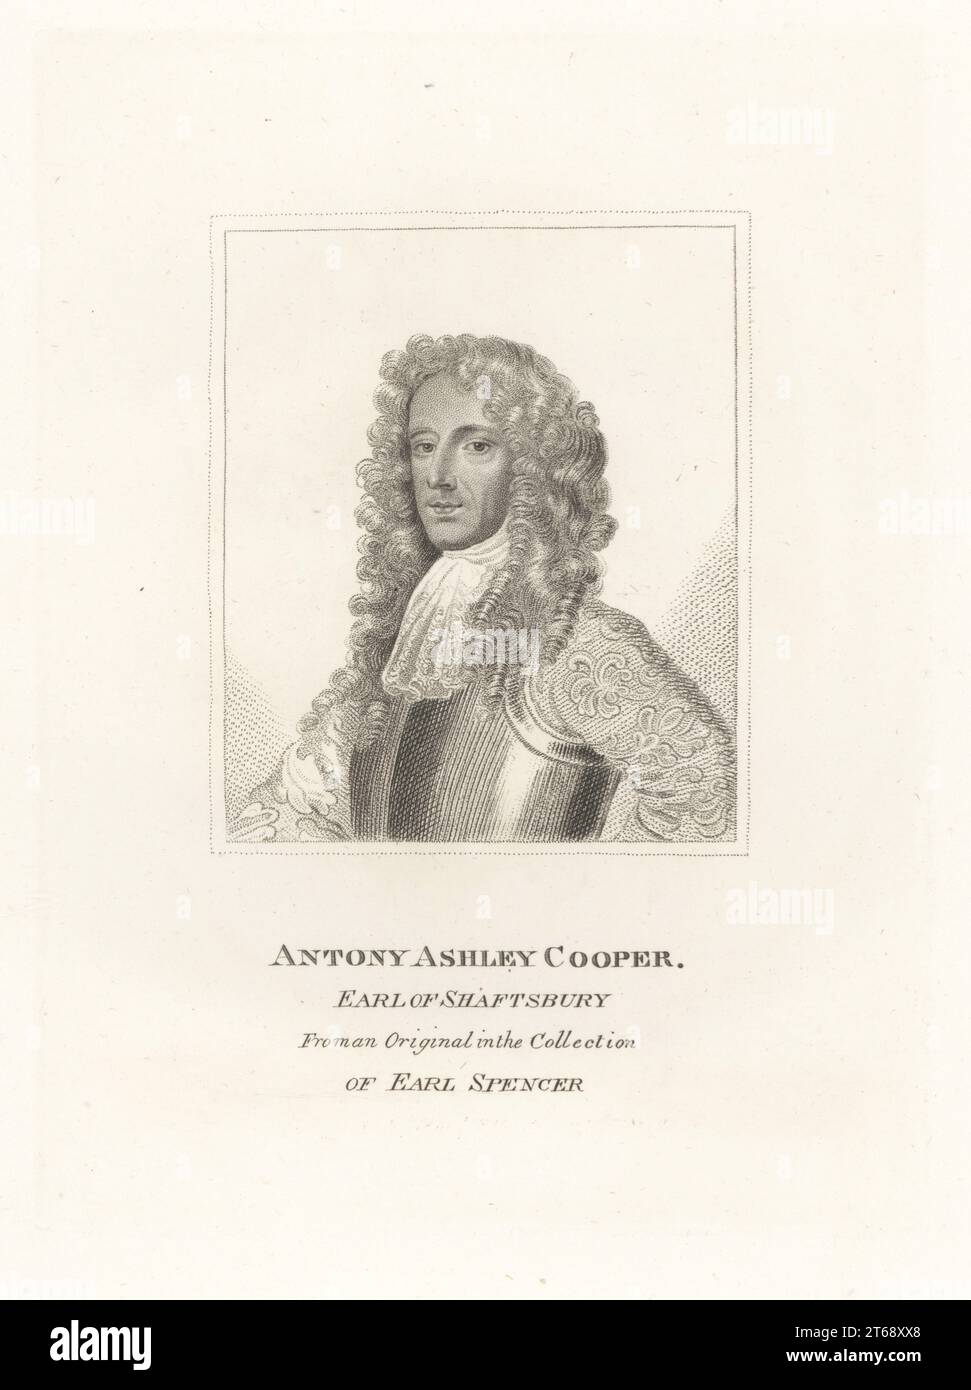 Antony Ashley Cooper, Earl of Shaftesbury, 1621-1683. English Whig politician during the Interregnum and the reign of King Charles II. In long wig, cravatte, breastplate and brocade doublet. From an original in the collection of Earl Spencer. Copperplate engraving from Samuel Woodburns Gallery of Rare Portraits Consisting of Original Plates, George Jones, 102 St Martins Lane, London, 1816. Stock Photo